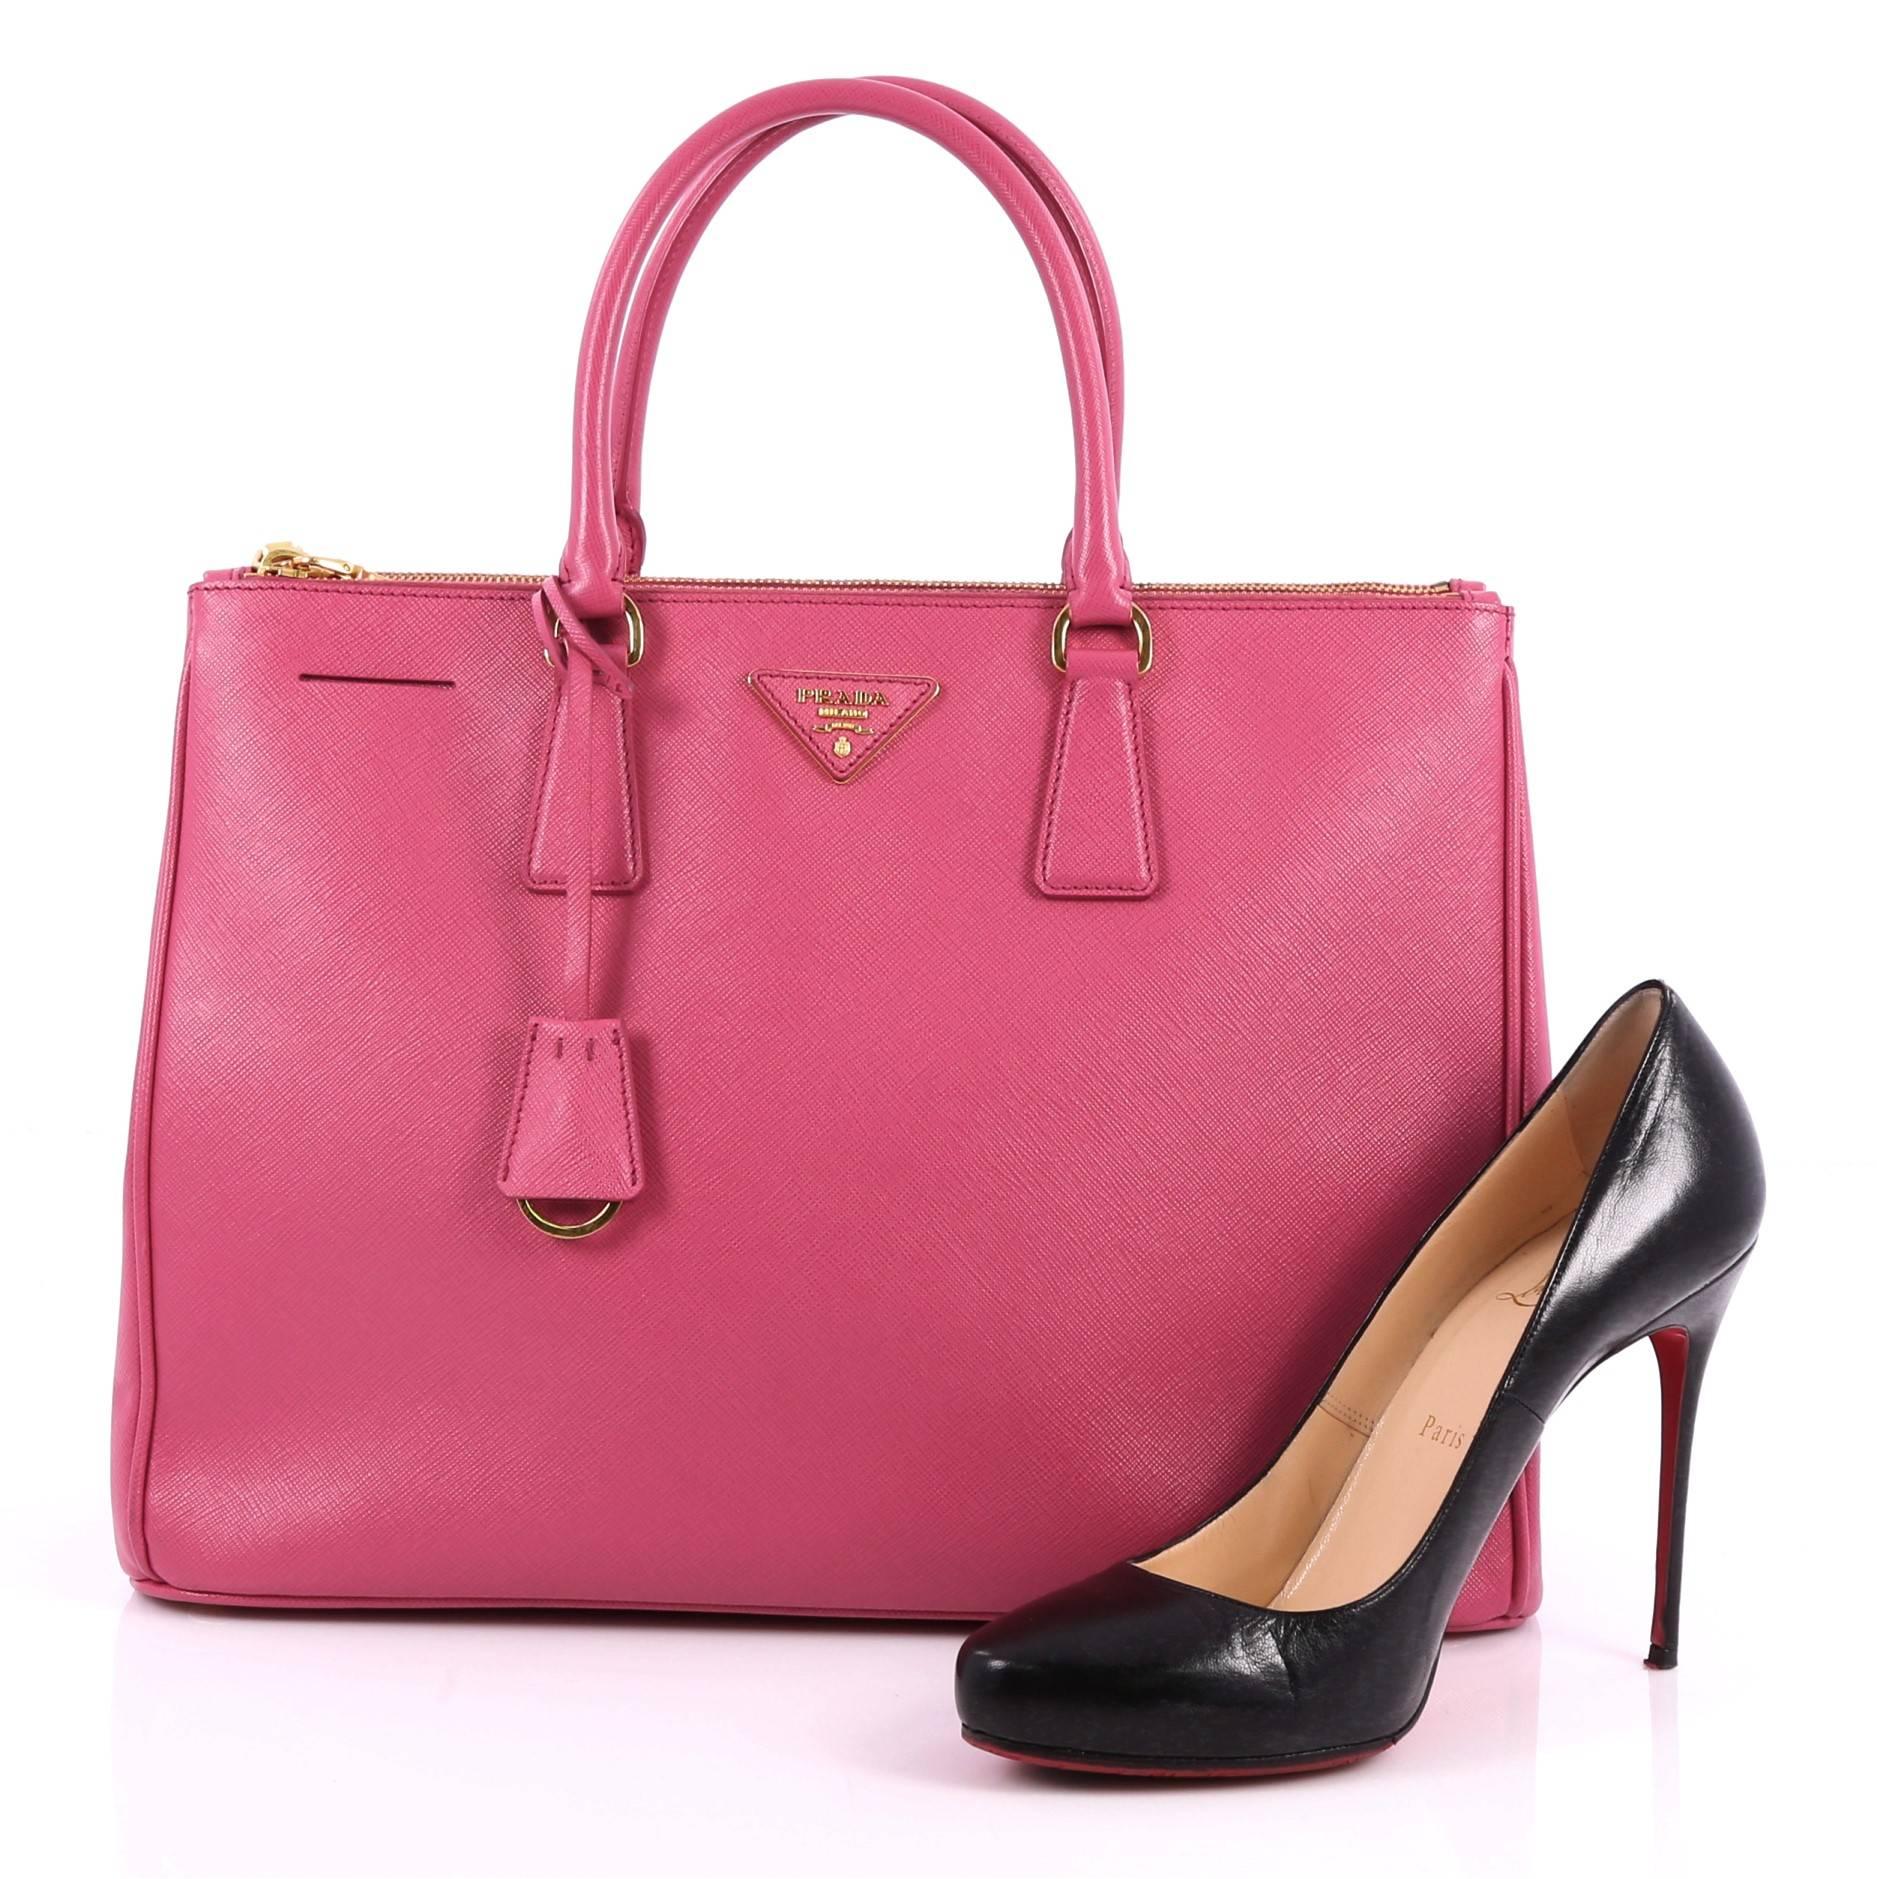 This authentic Prada Double Zip Lux Tote Saffiano Leather Large is the perfect bag to complete any outfit. Crafted from pink saffiano leather, this boxy tote features side snap buttons, raised Prada logo, dual-rolled leather handles and gold-tone